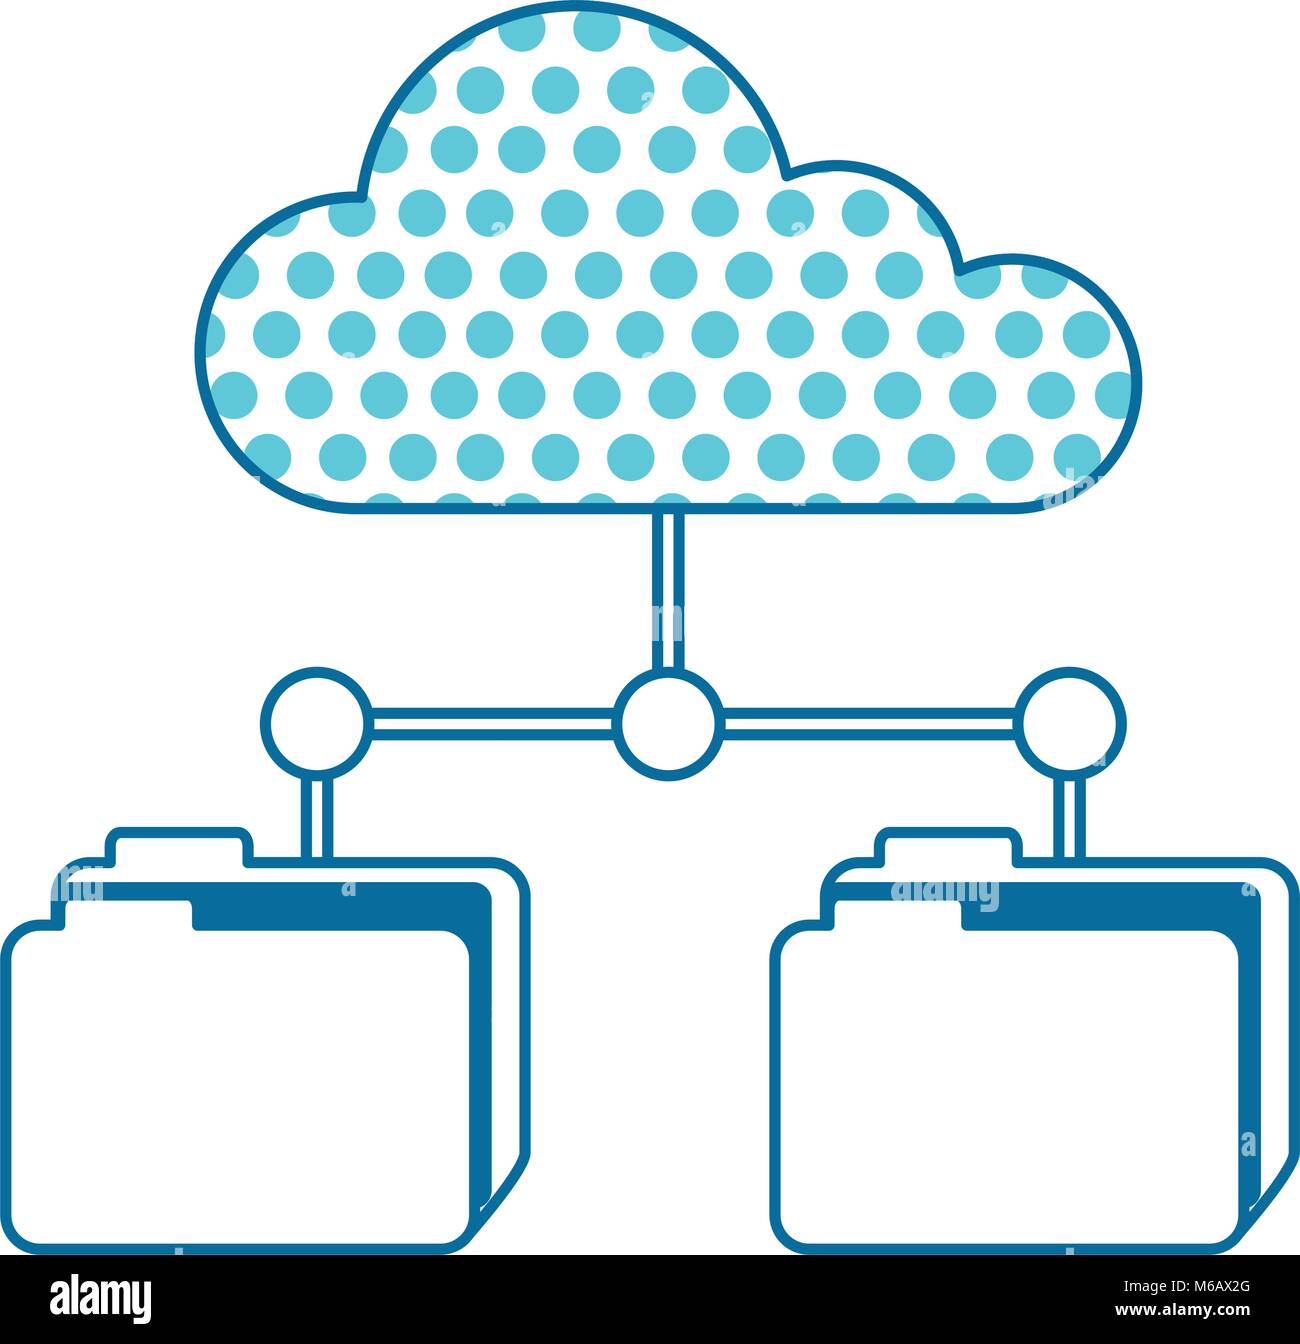 Cloud Computing With File Folders Network Stock Vector Image And Art Alamy